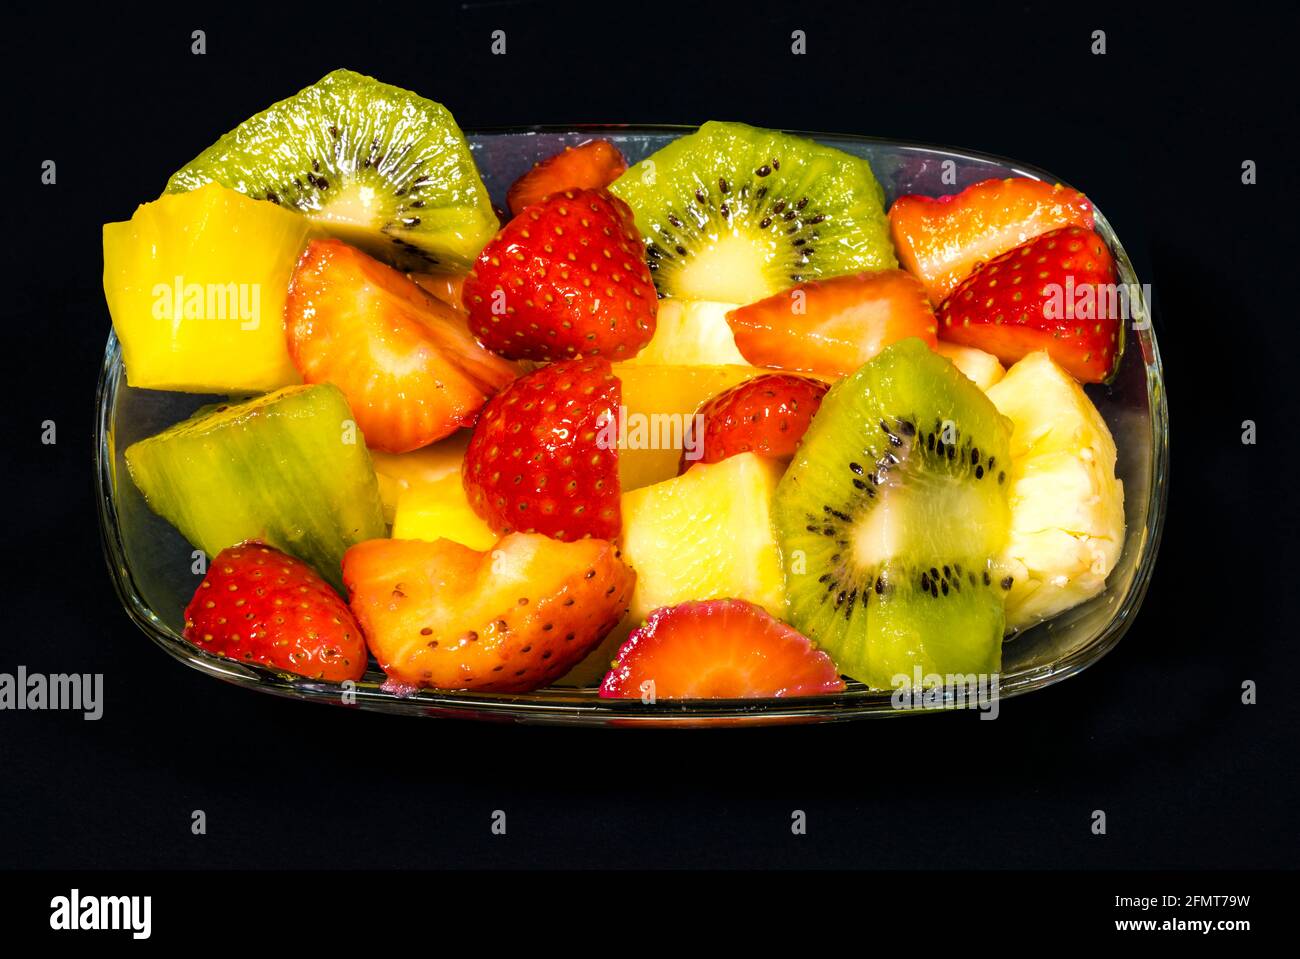 fresh fruit macedonia cut into cubes, Isolated background in black Stock Photo